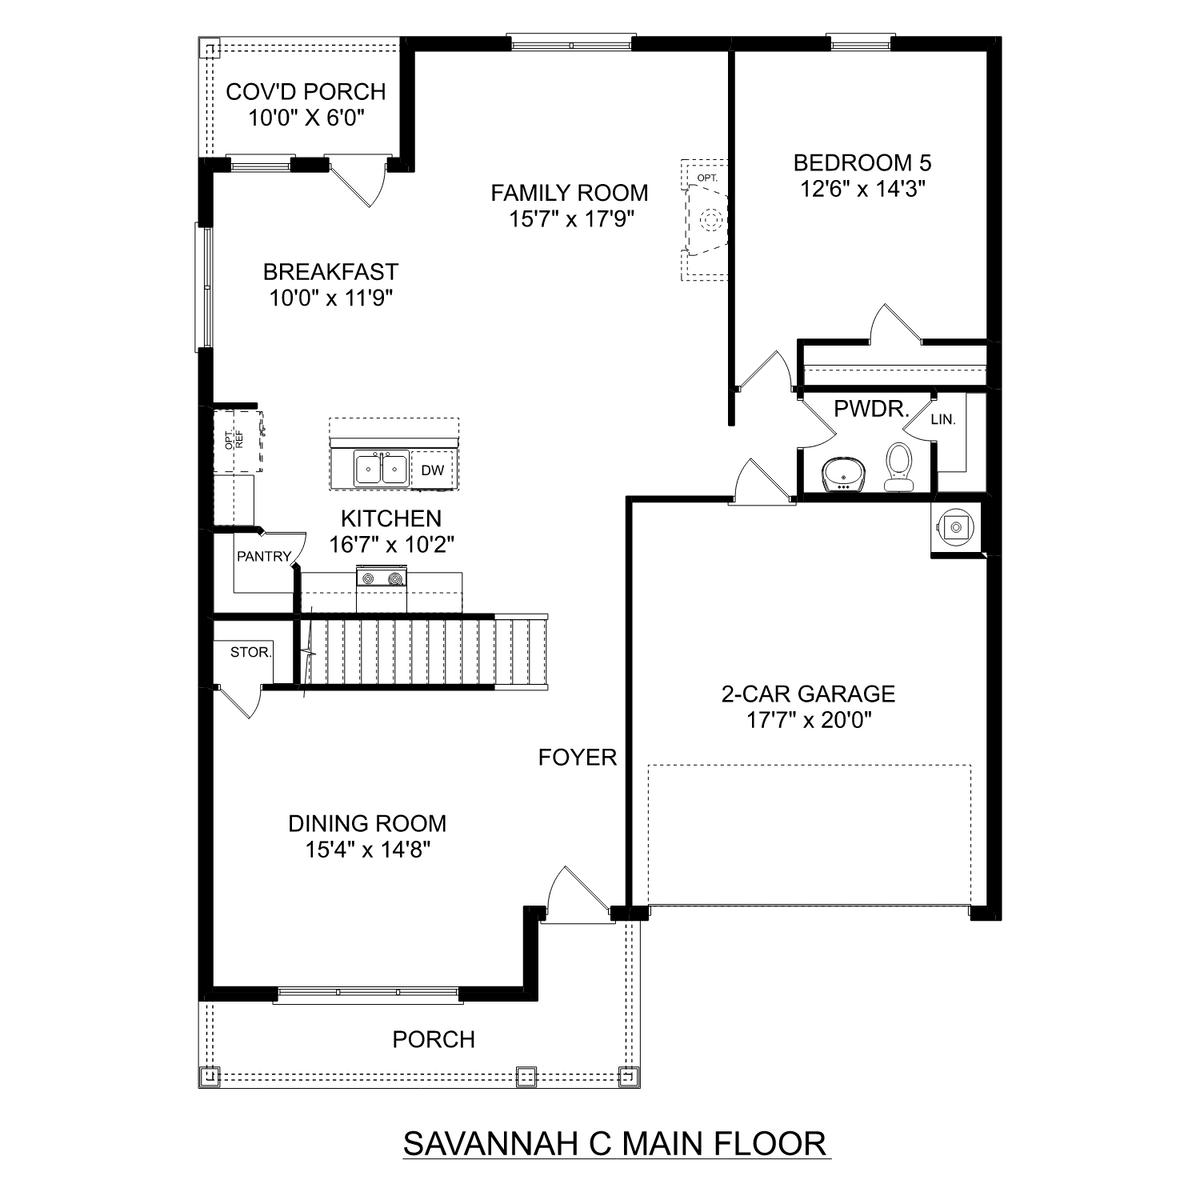 1 - The Savannah C floor plan layout for 142 Cherry Laurel Drive in Davidson Homes' Clearview community.